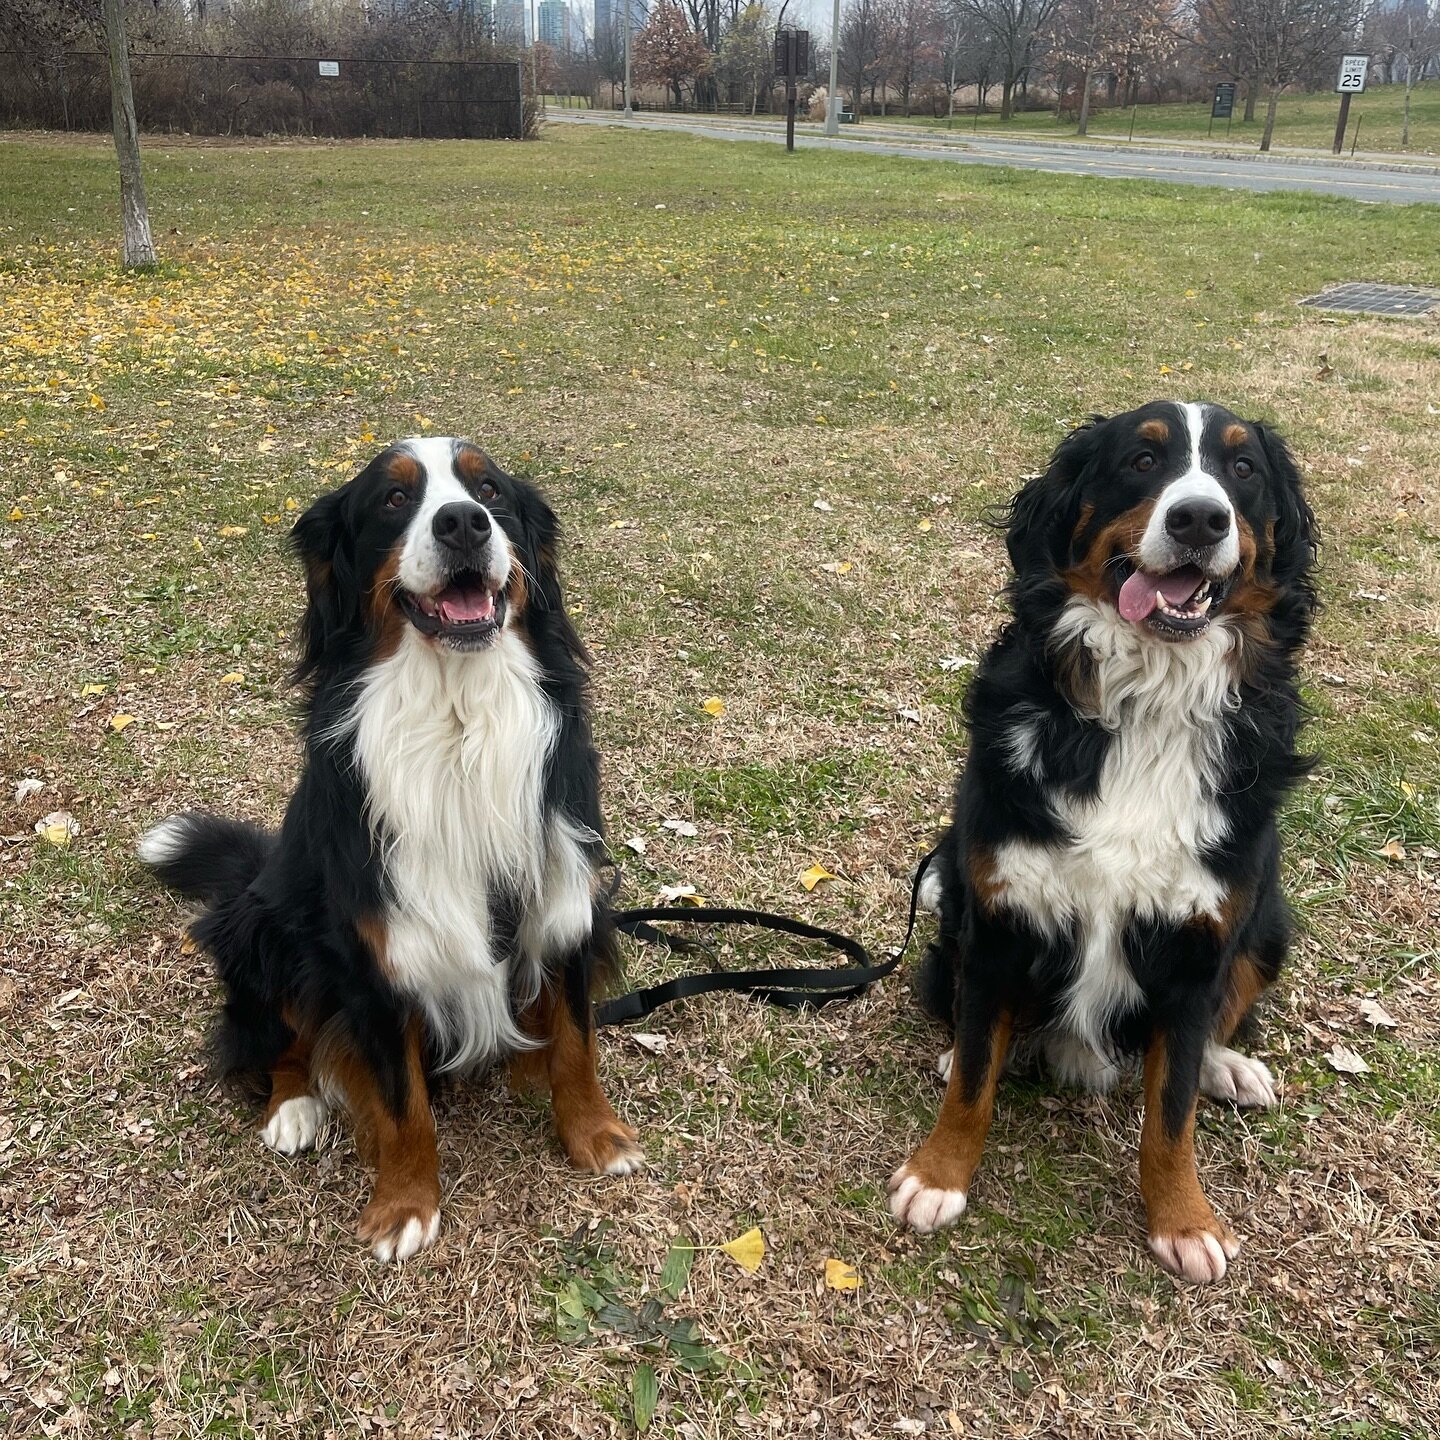 The BEARS Duncan and Spanky are both working hard on being the bestest big brothers ever! Heeling next to the stroller, relaxing on the mat and much more.
#hoboken #jerseycity #unioncity #bernesemountaindog #hobokendogs #dogsofhoboken #dogsofjerseyci